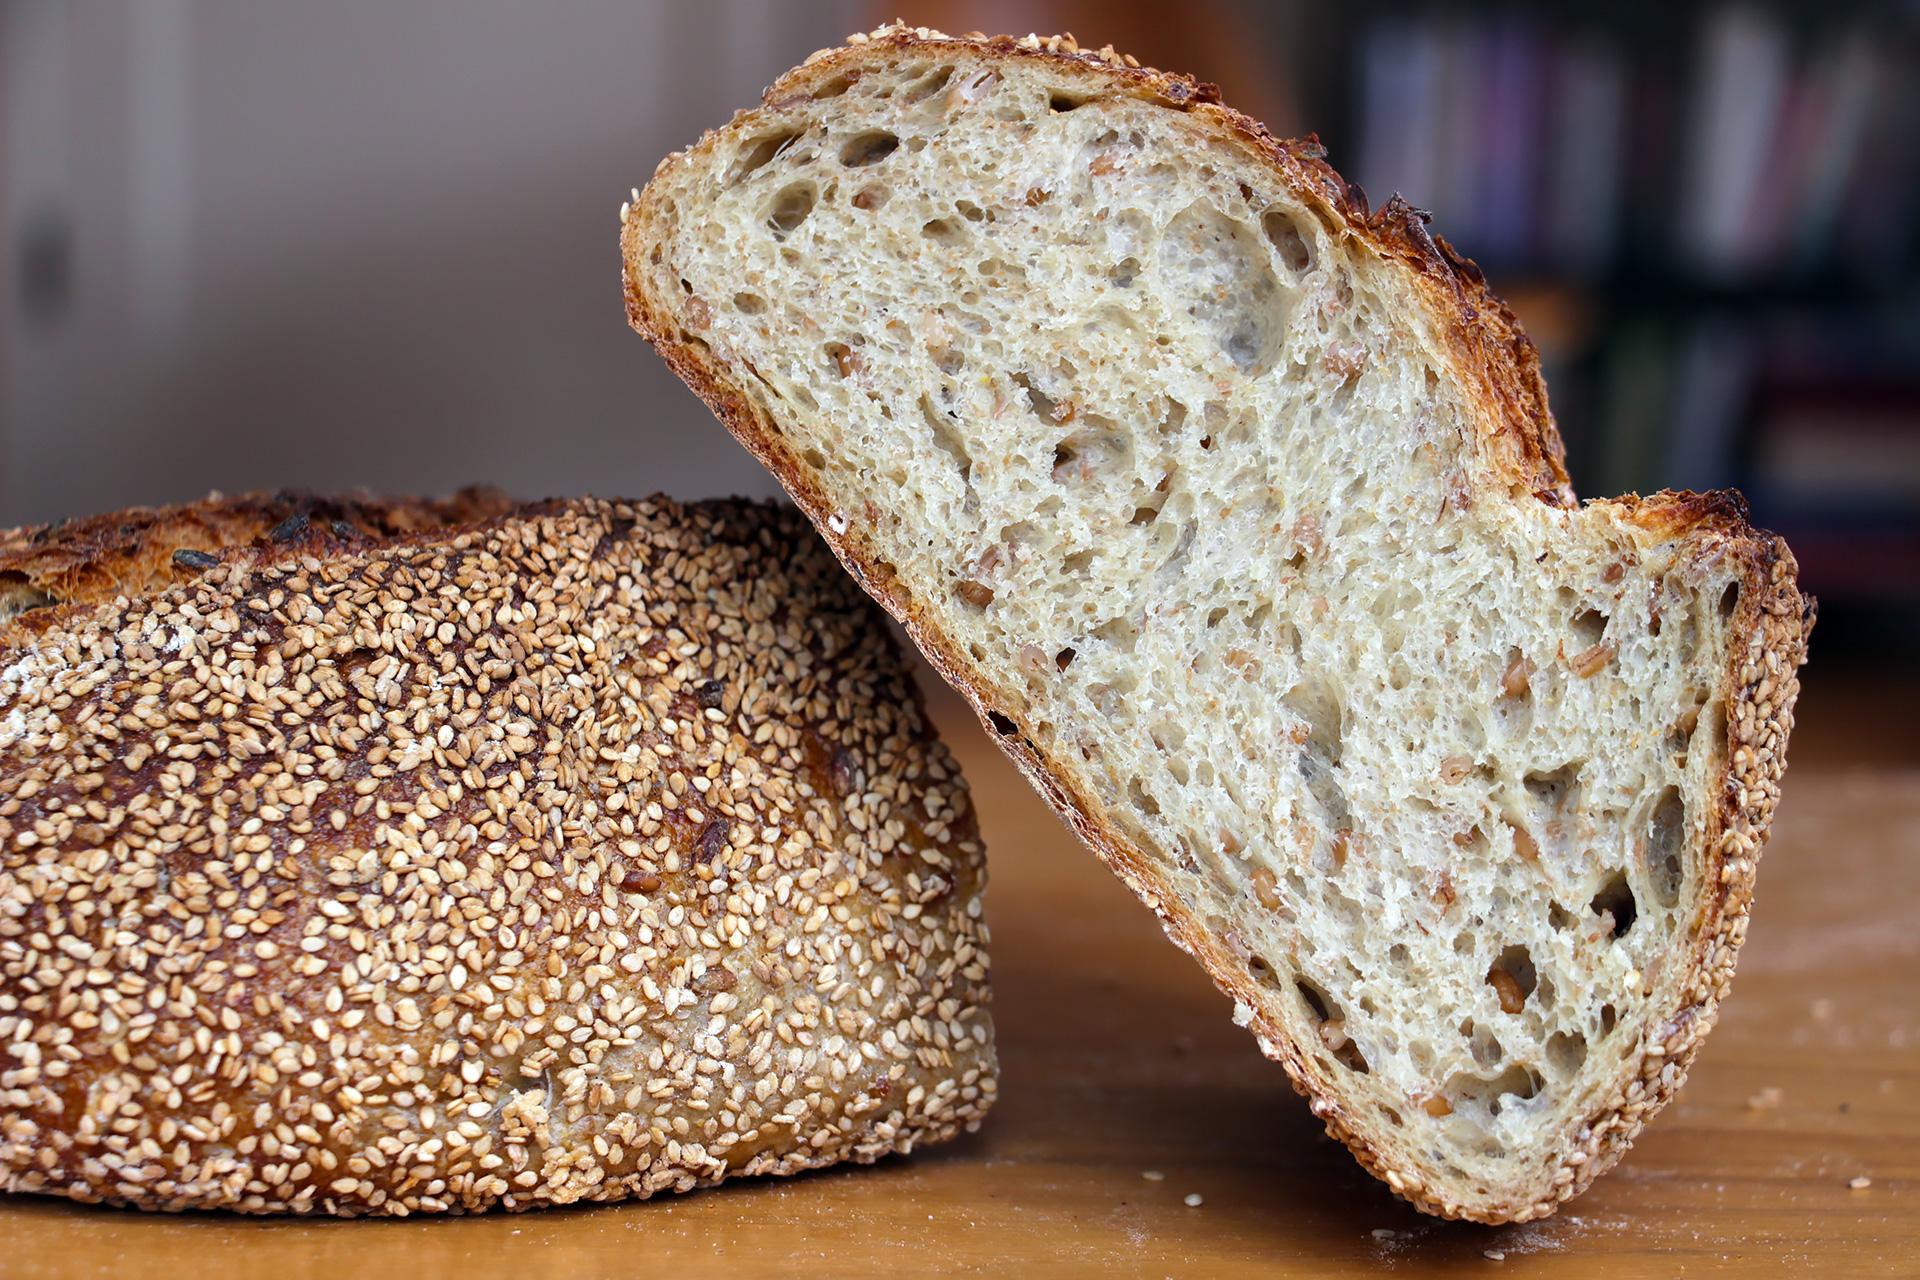 Firebrand's Sprouted Rye Batard